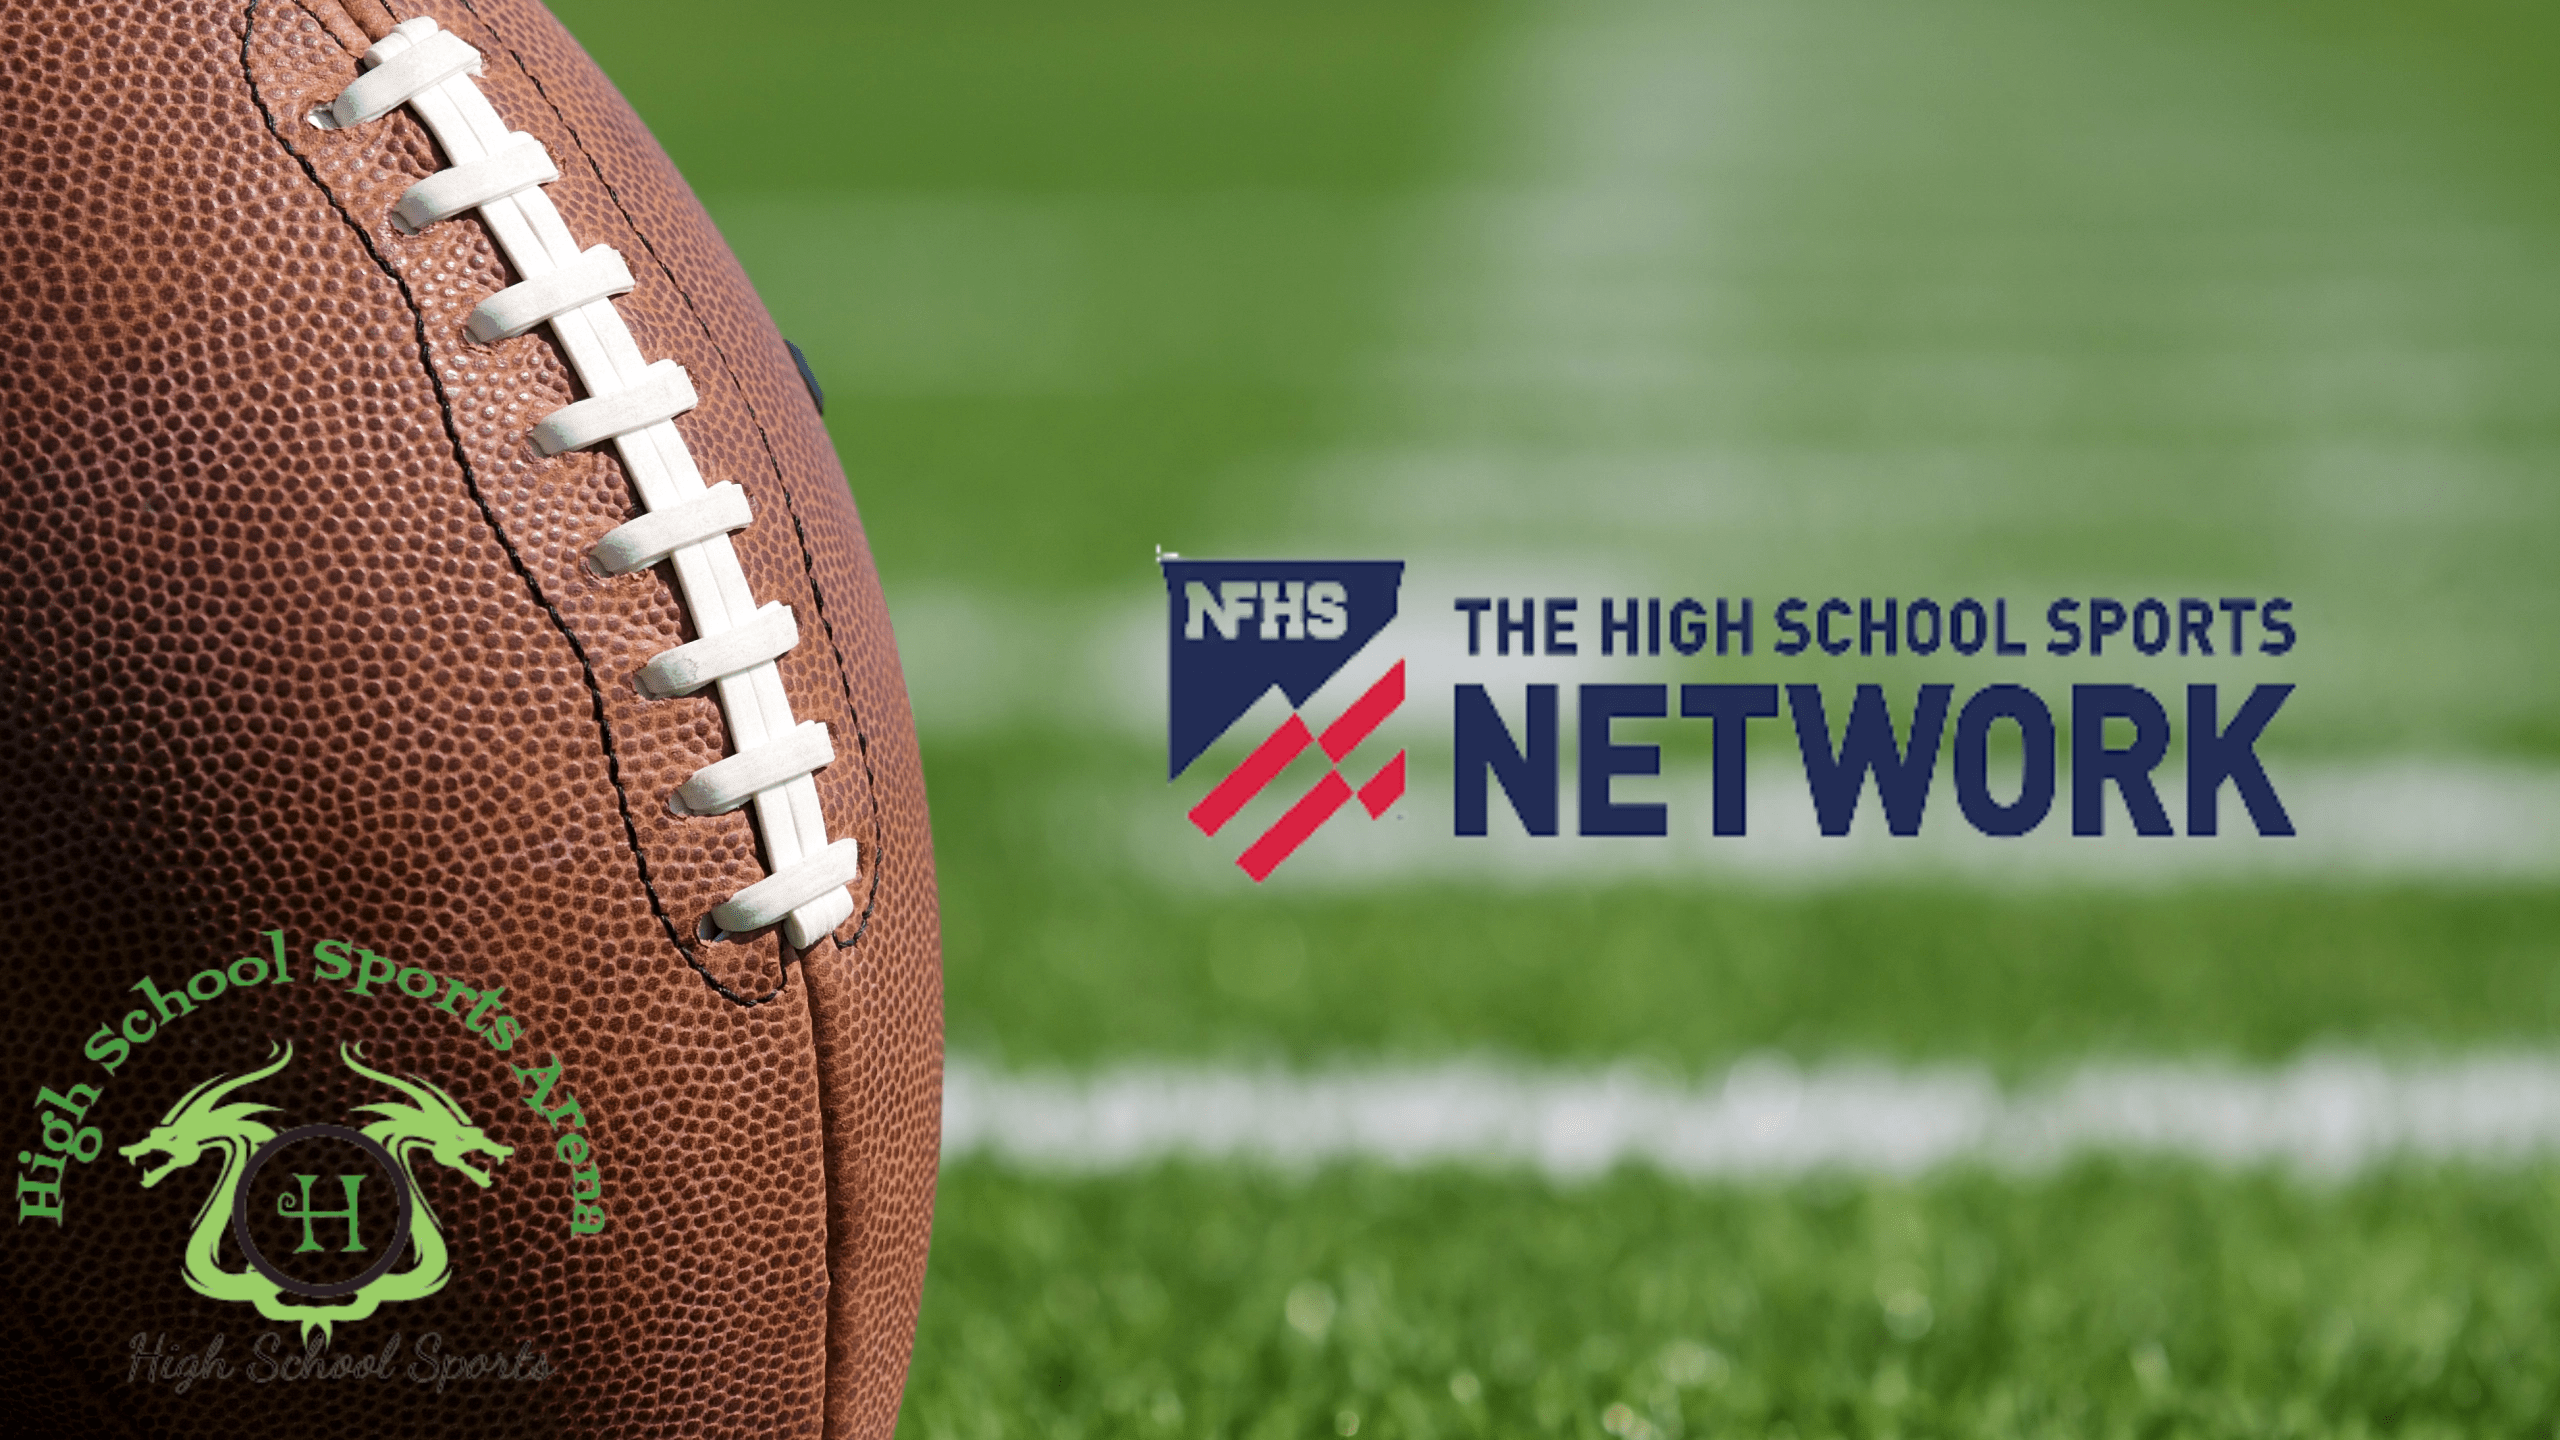 How to Catch All the Action from Your Favorite High School Football Team on NFHS Network